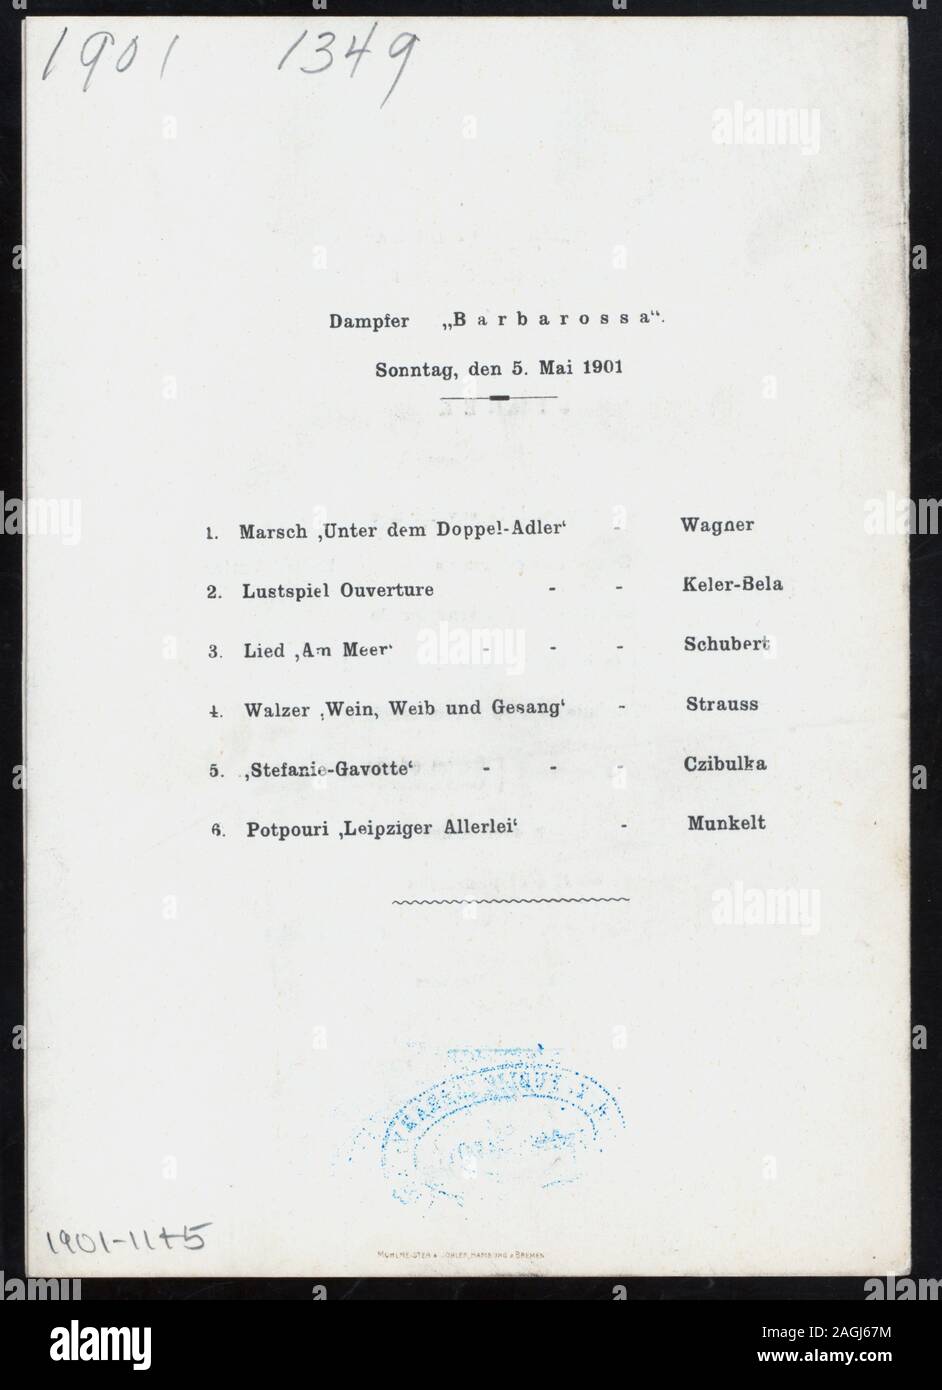 GERMAN & ENGLISH; ILLUSTRATION OF MYTHICAL FIGURES; SEAFARING INSIGNIA; CONCERT PROGRAMM ON BACK COVER Citation/Reference: 1901-1145; MITTAGESSEN - DINNER [held by] NORDDEUTSCHER LLOYD BREMEN [at] DAMPFER BARBAROSSA (SS;) Stock Photo